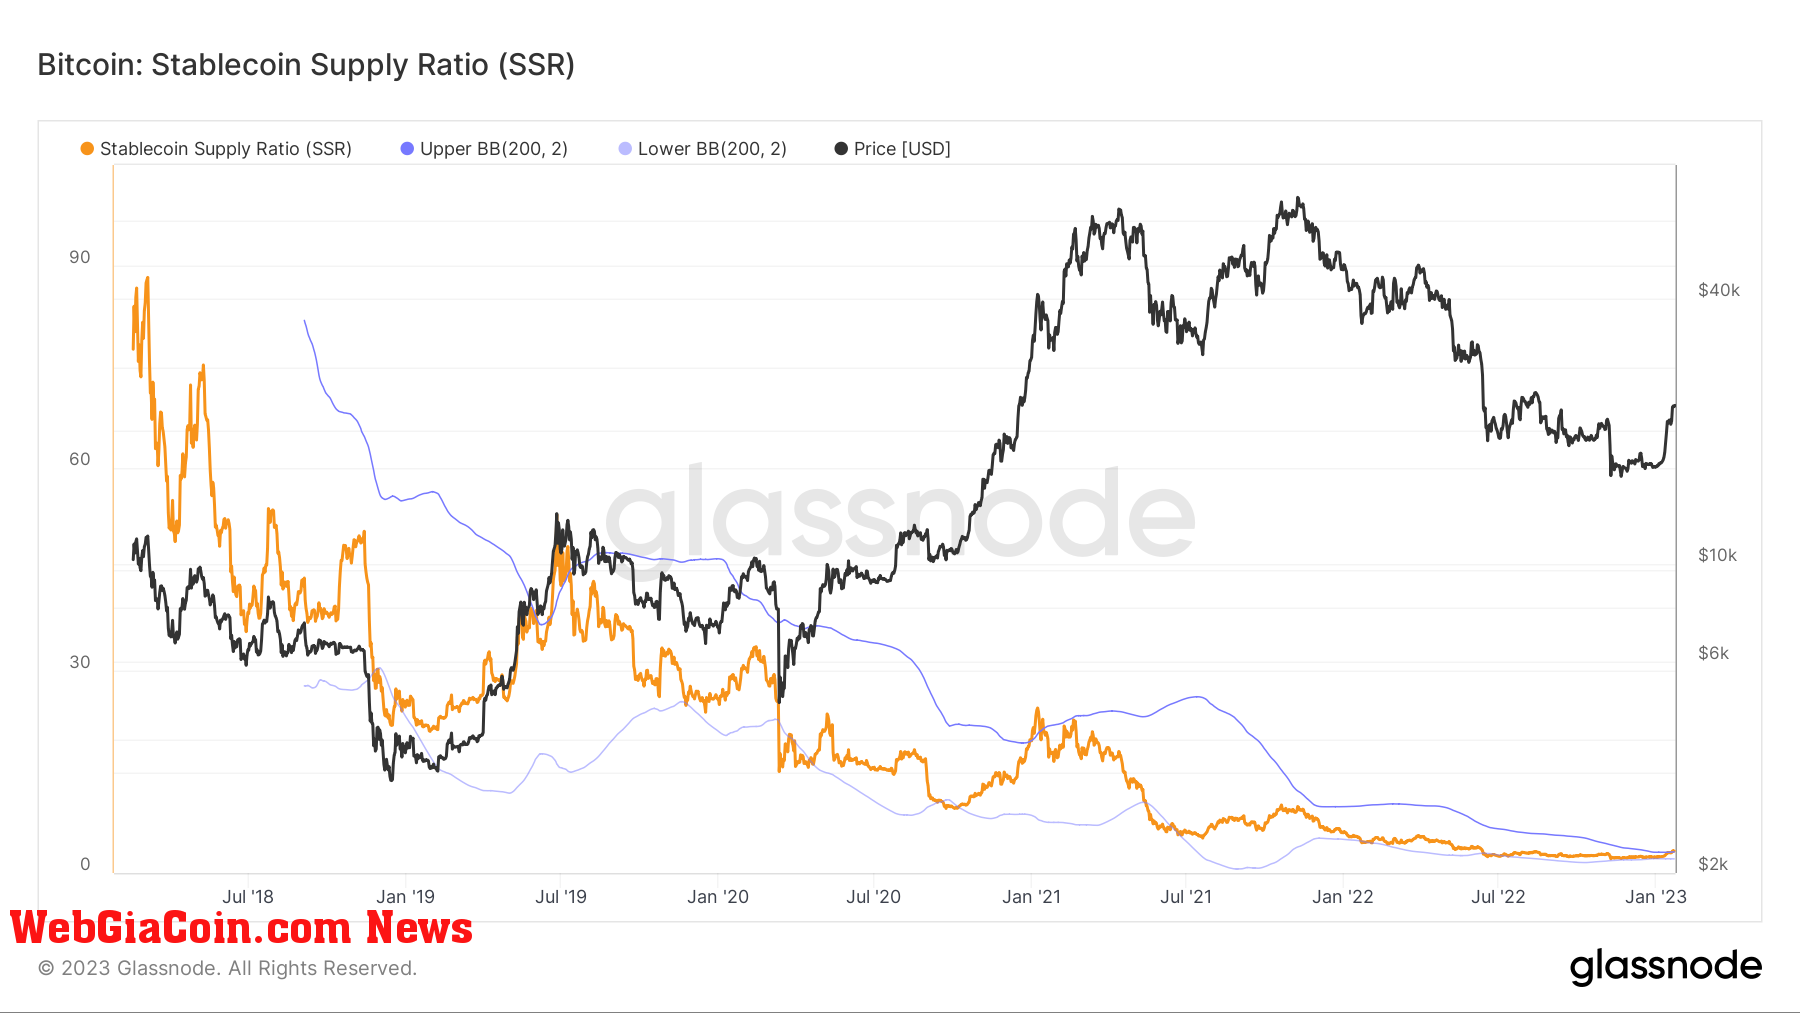 Stablecoin Supply Ratio: (Source: Glassnode)